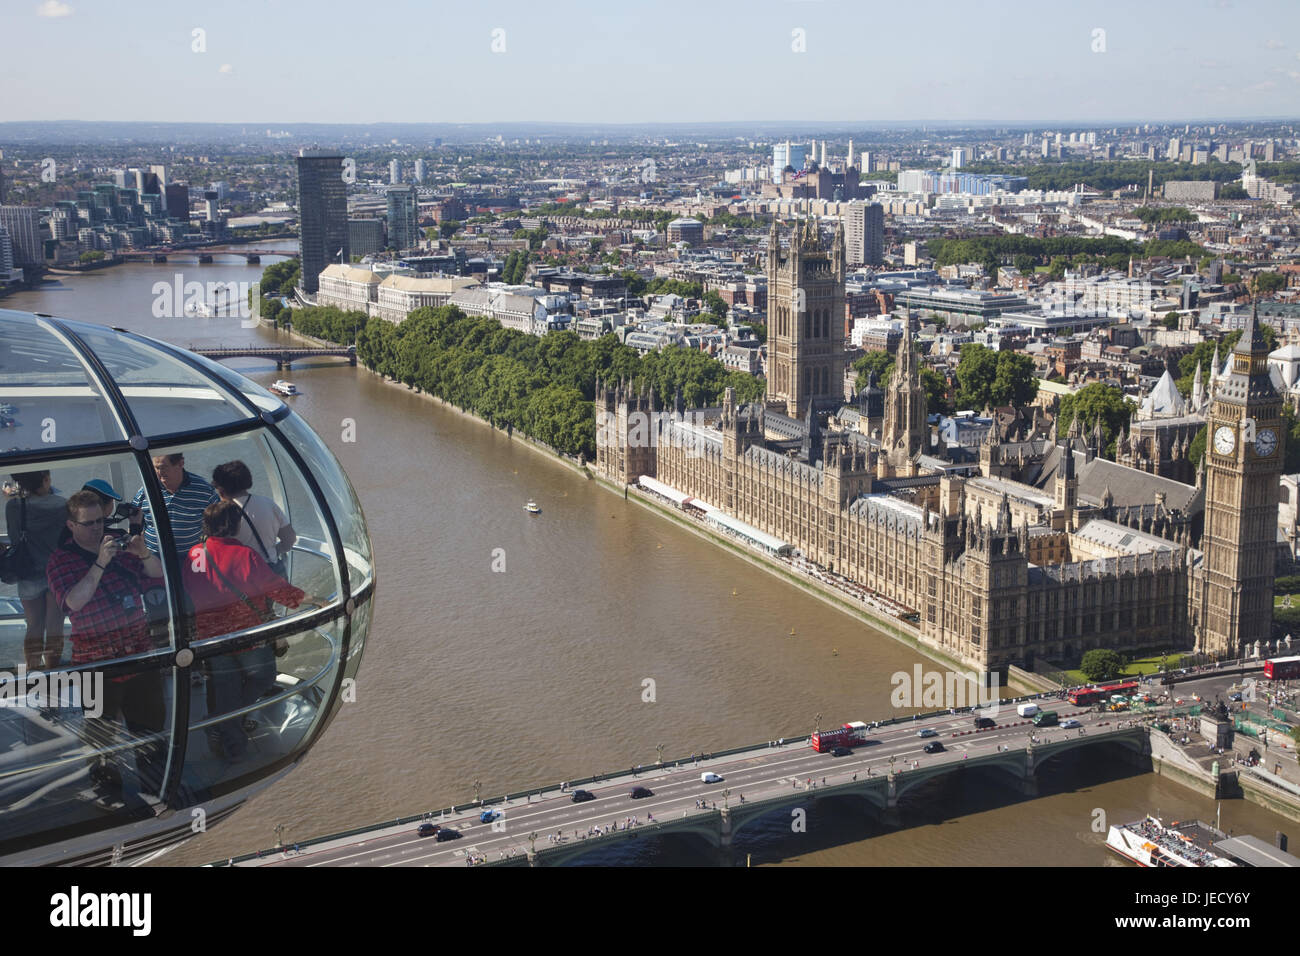 England, London, Westminster, Palace of Westminster, Big Ben, the Thames, view of London Eye, town view, town, parliament, building, structure, landmark, river, aerial shots, tourism, tourist, crowd-puller, bridge, cabin, Stock Photo